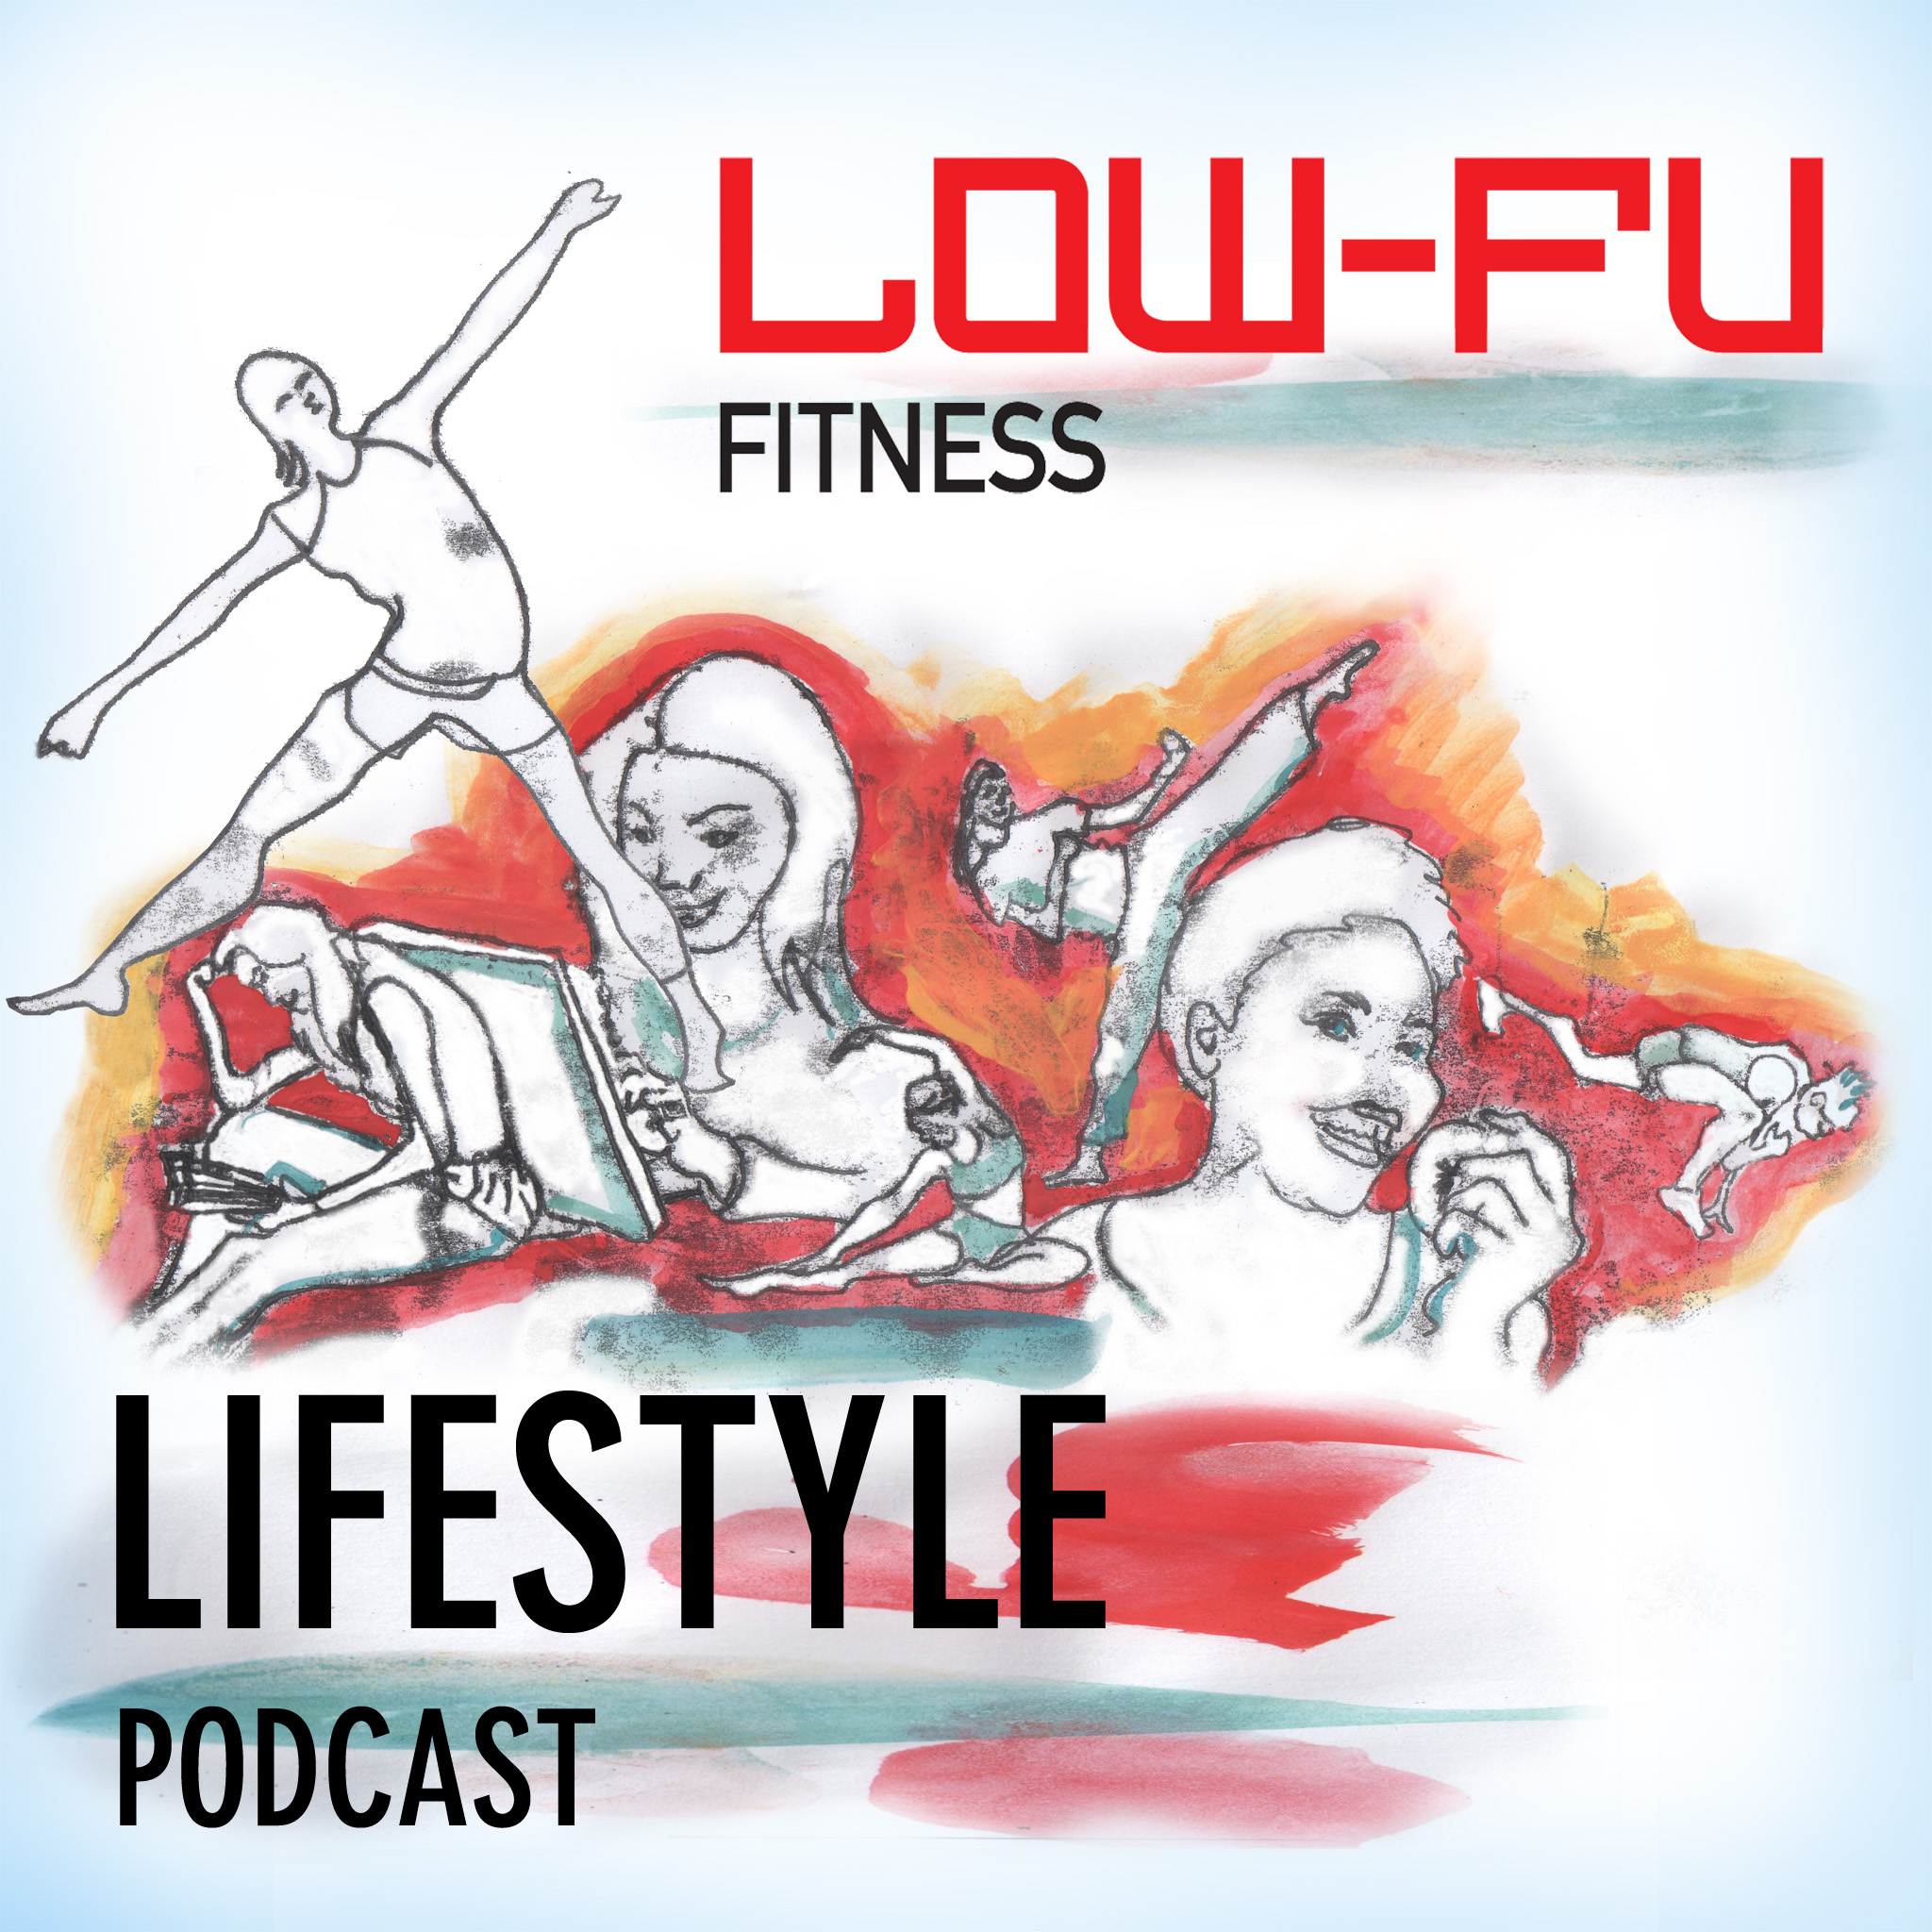 Episode 12: Roundhouse Kick, Great Body